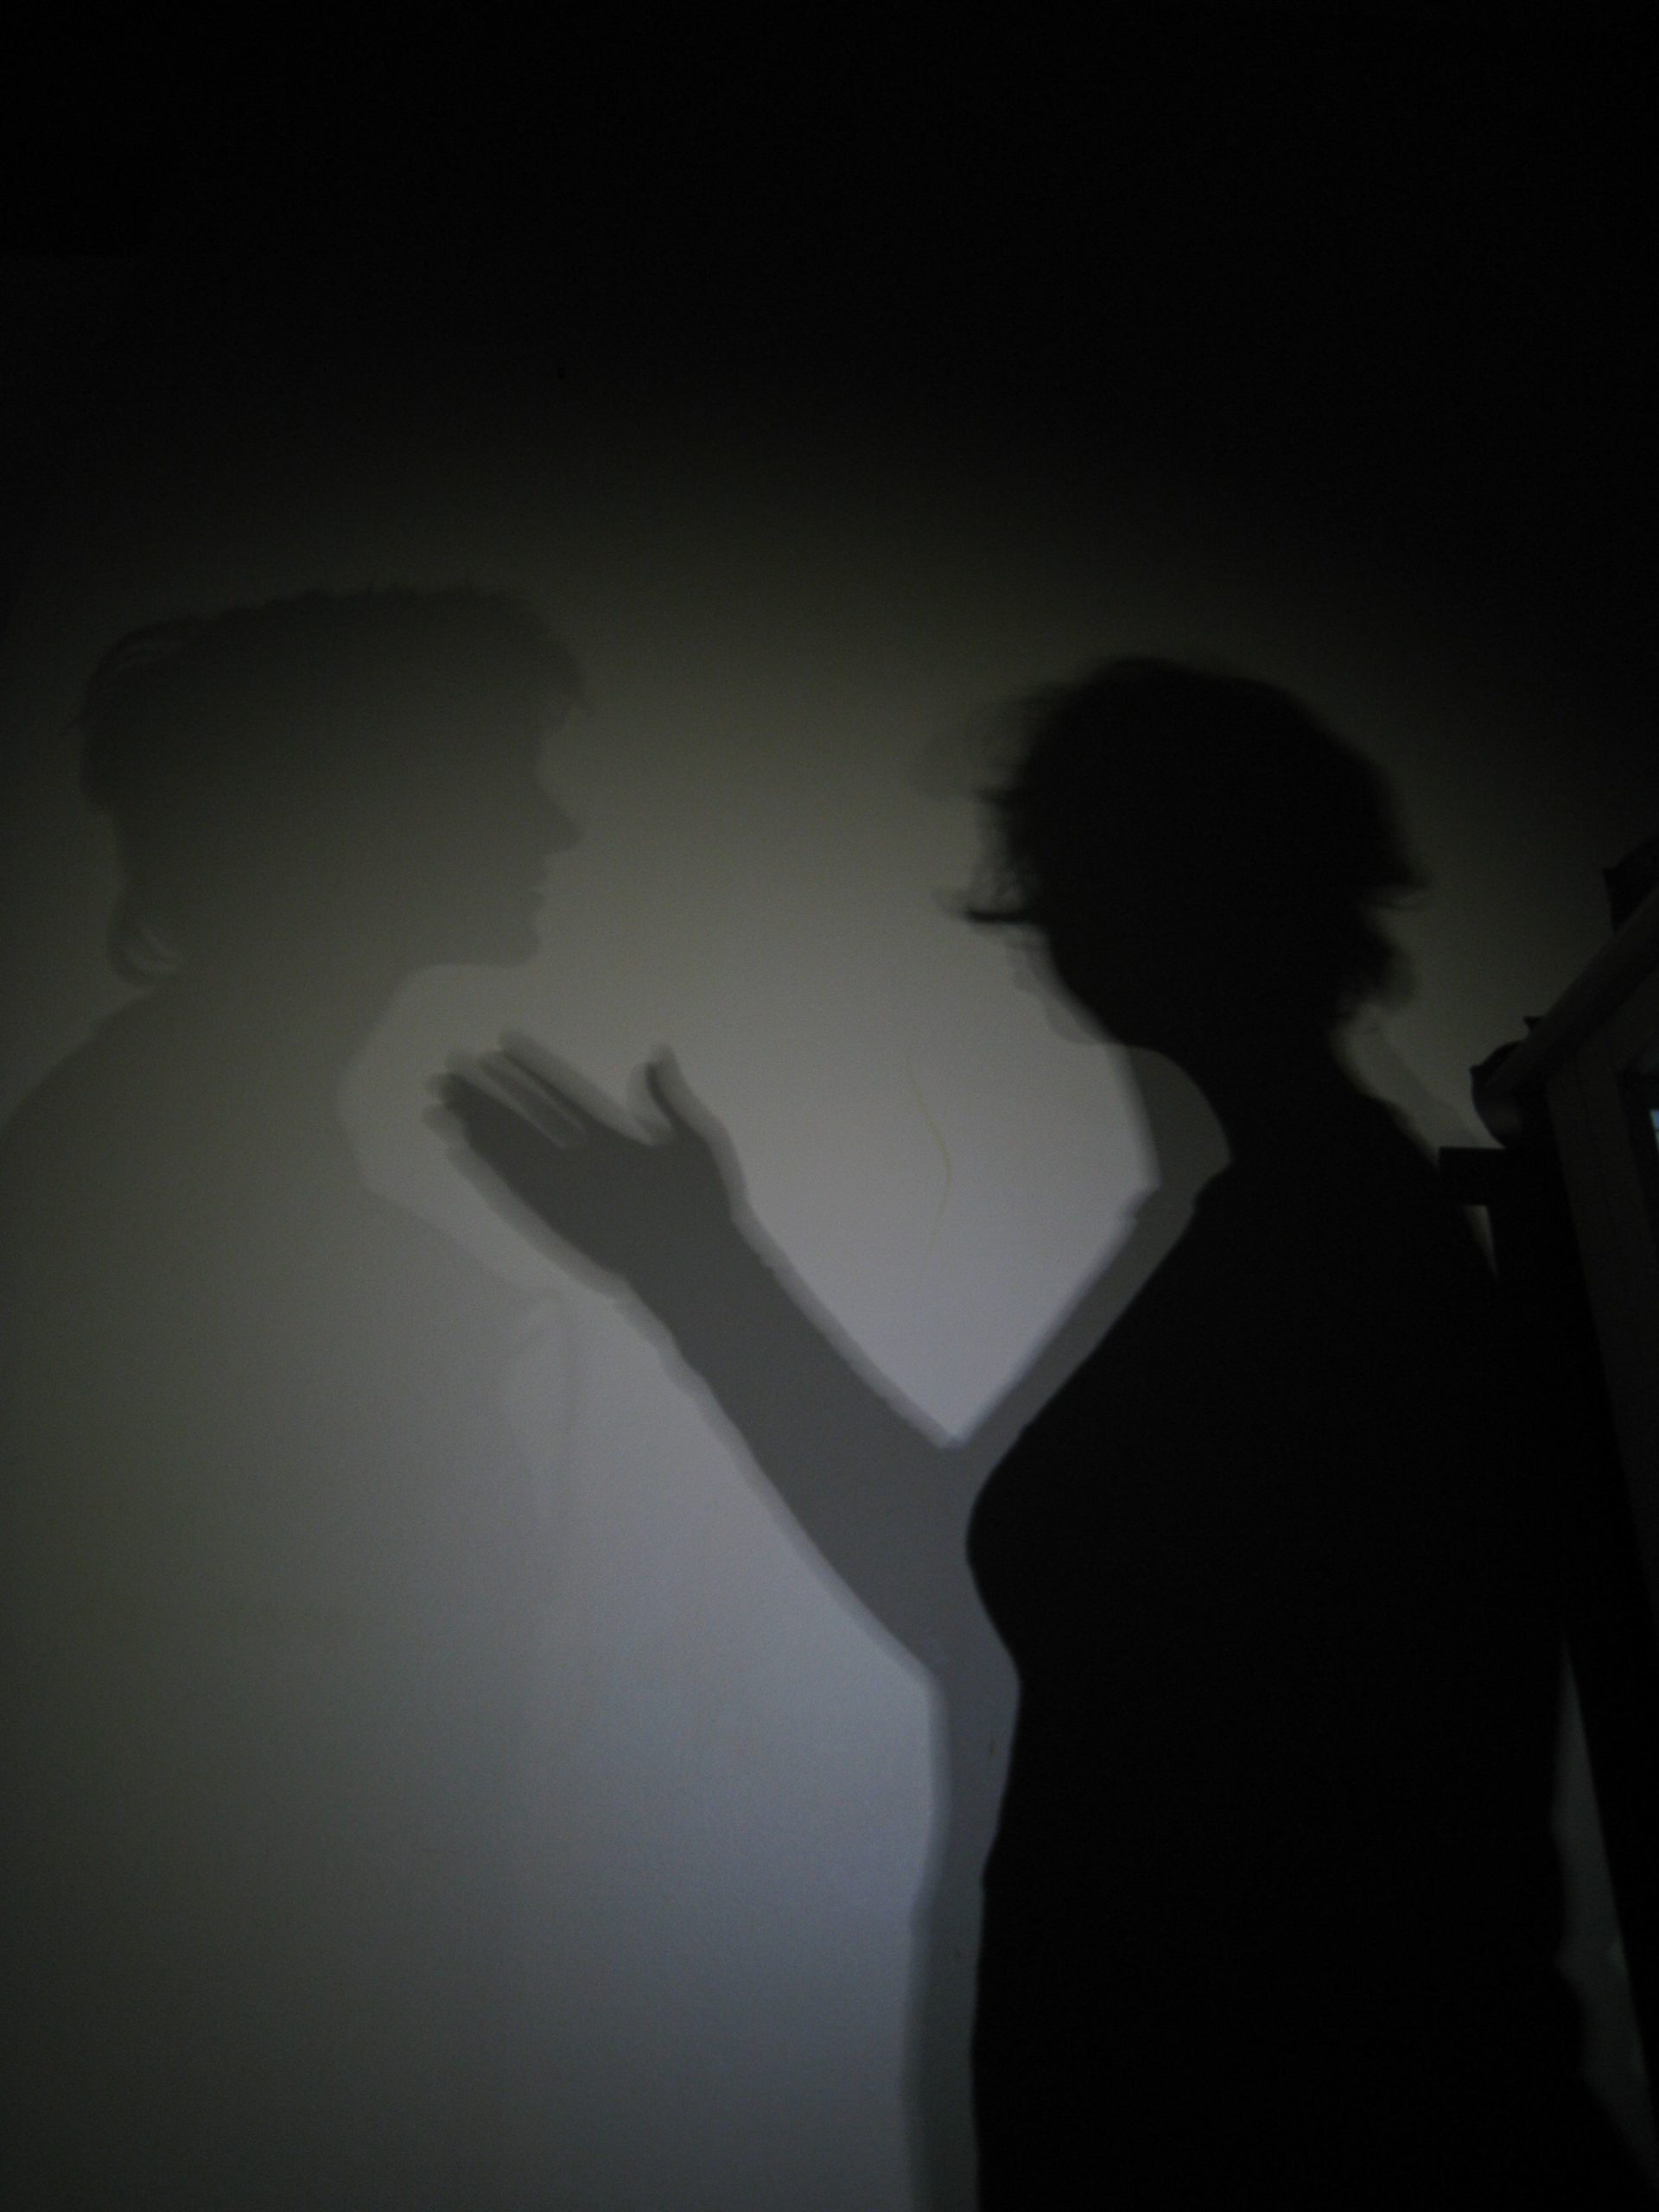 A photograph of the shadows of two people against a wall.